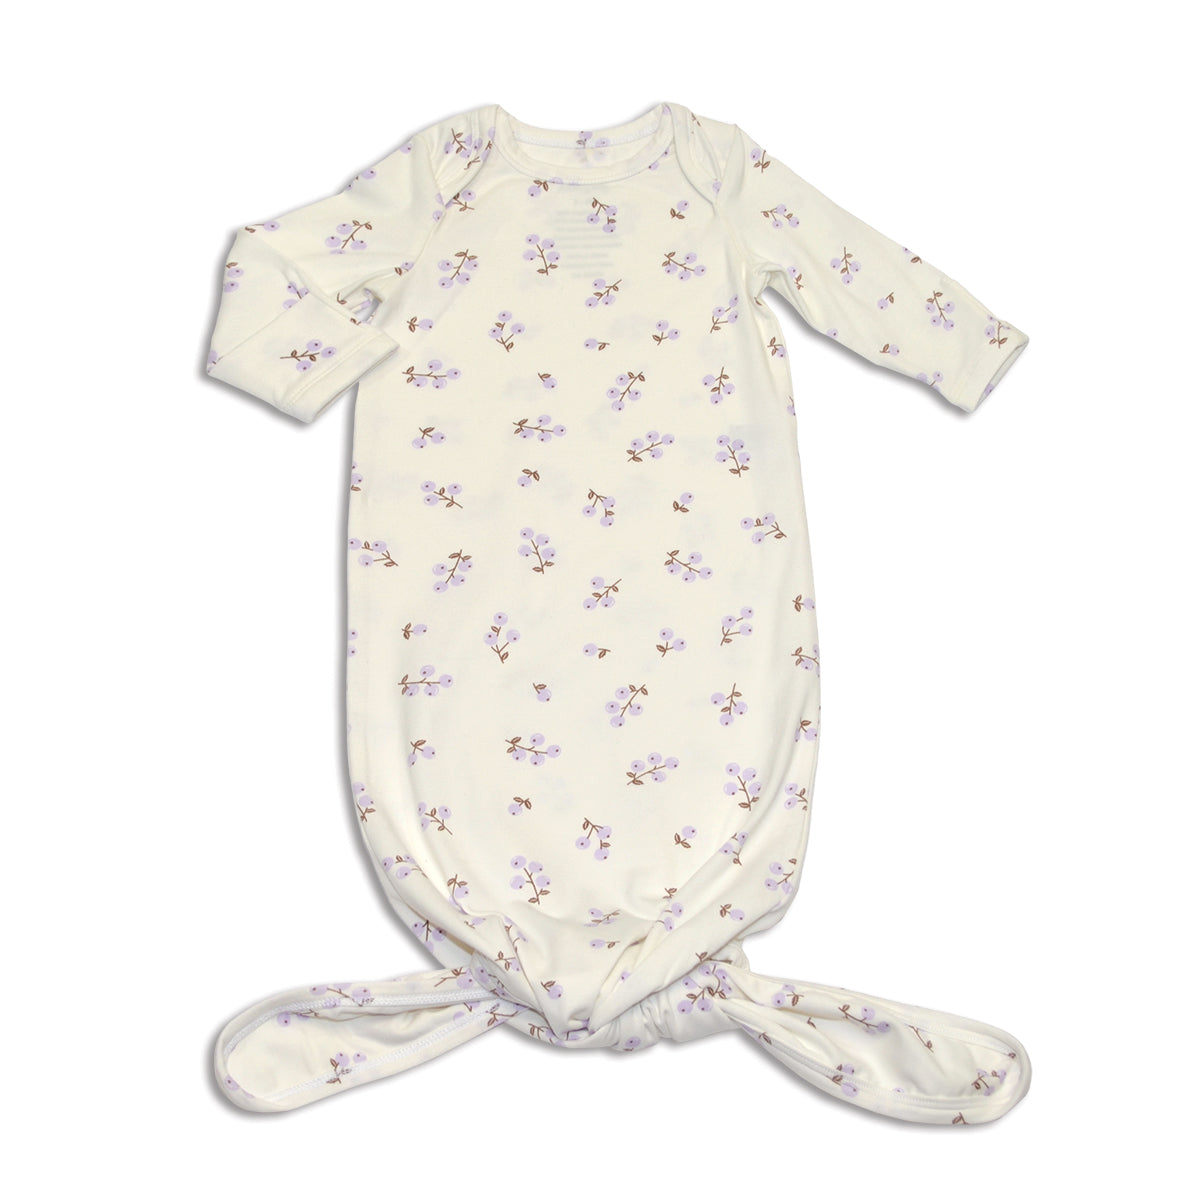 Organic Cotton Knotted Sleeper